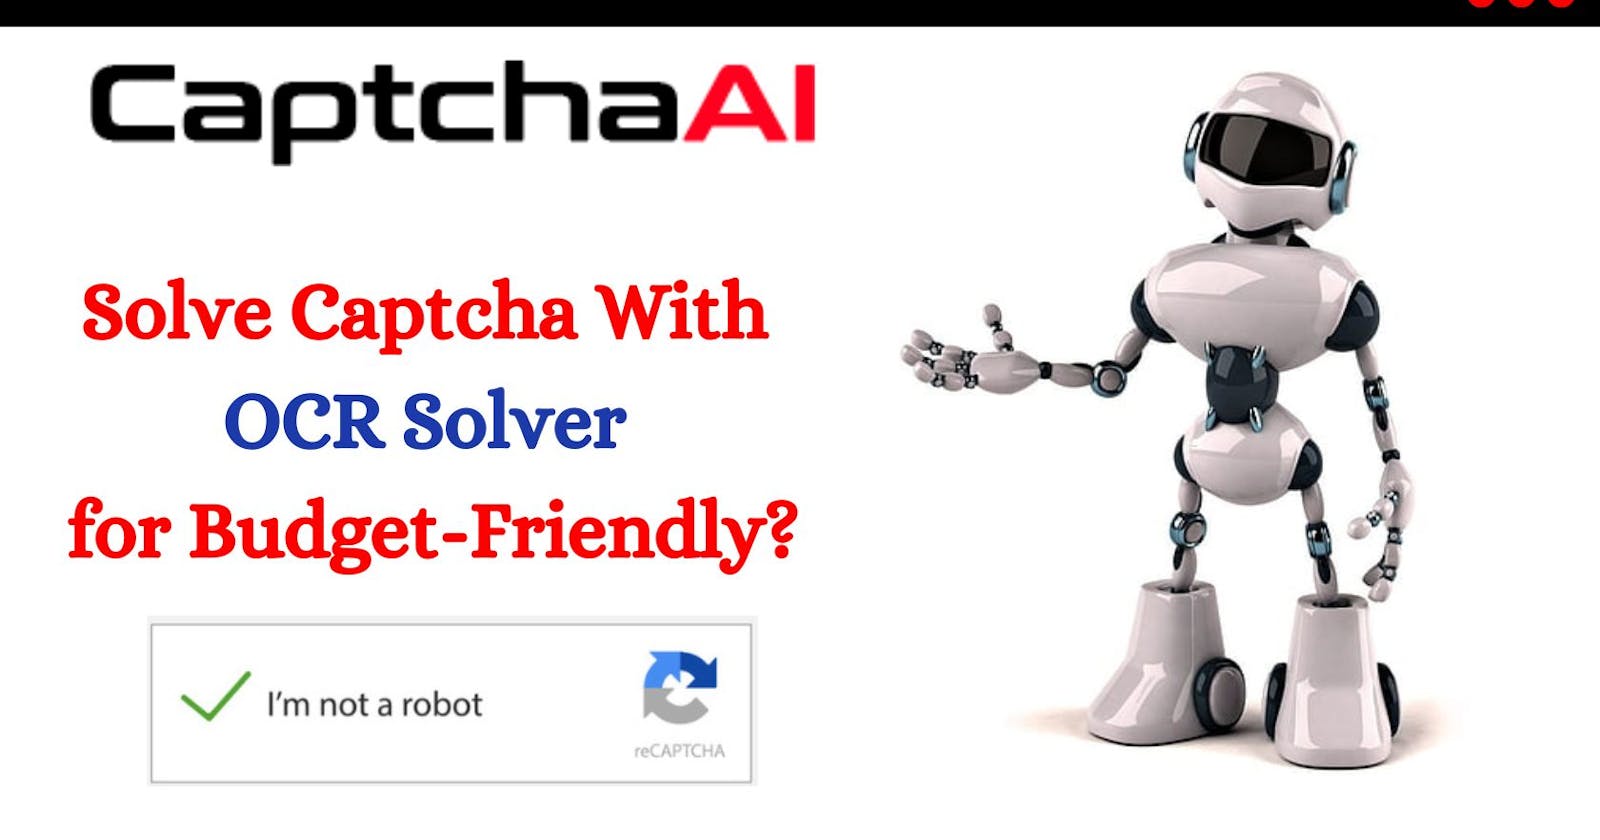 How To Solve Captcha With OCR Solver for Budget-Friendly?